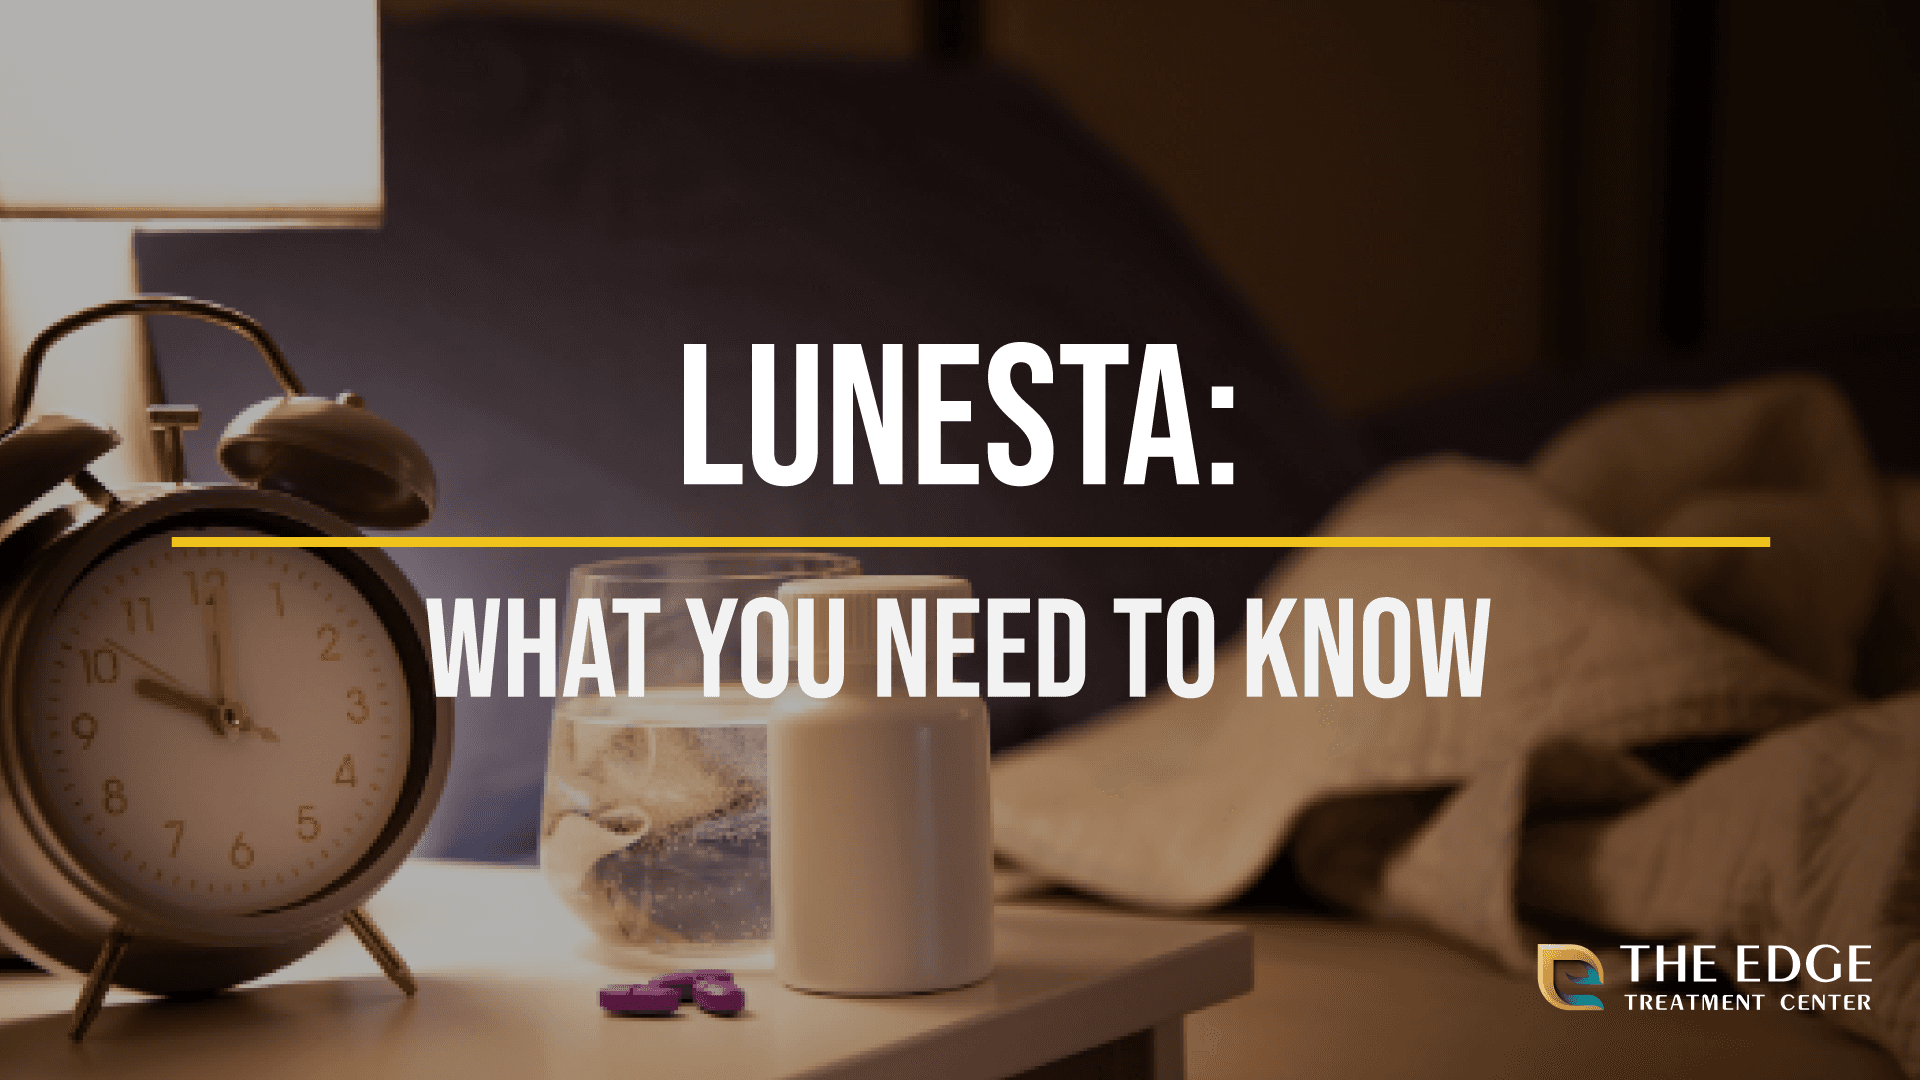 Facts About Lunesta Abuse